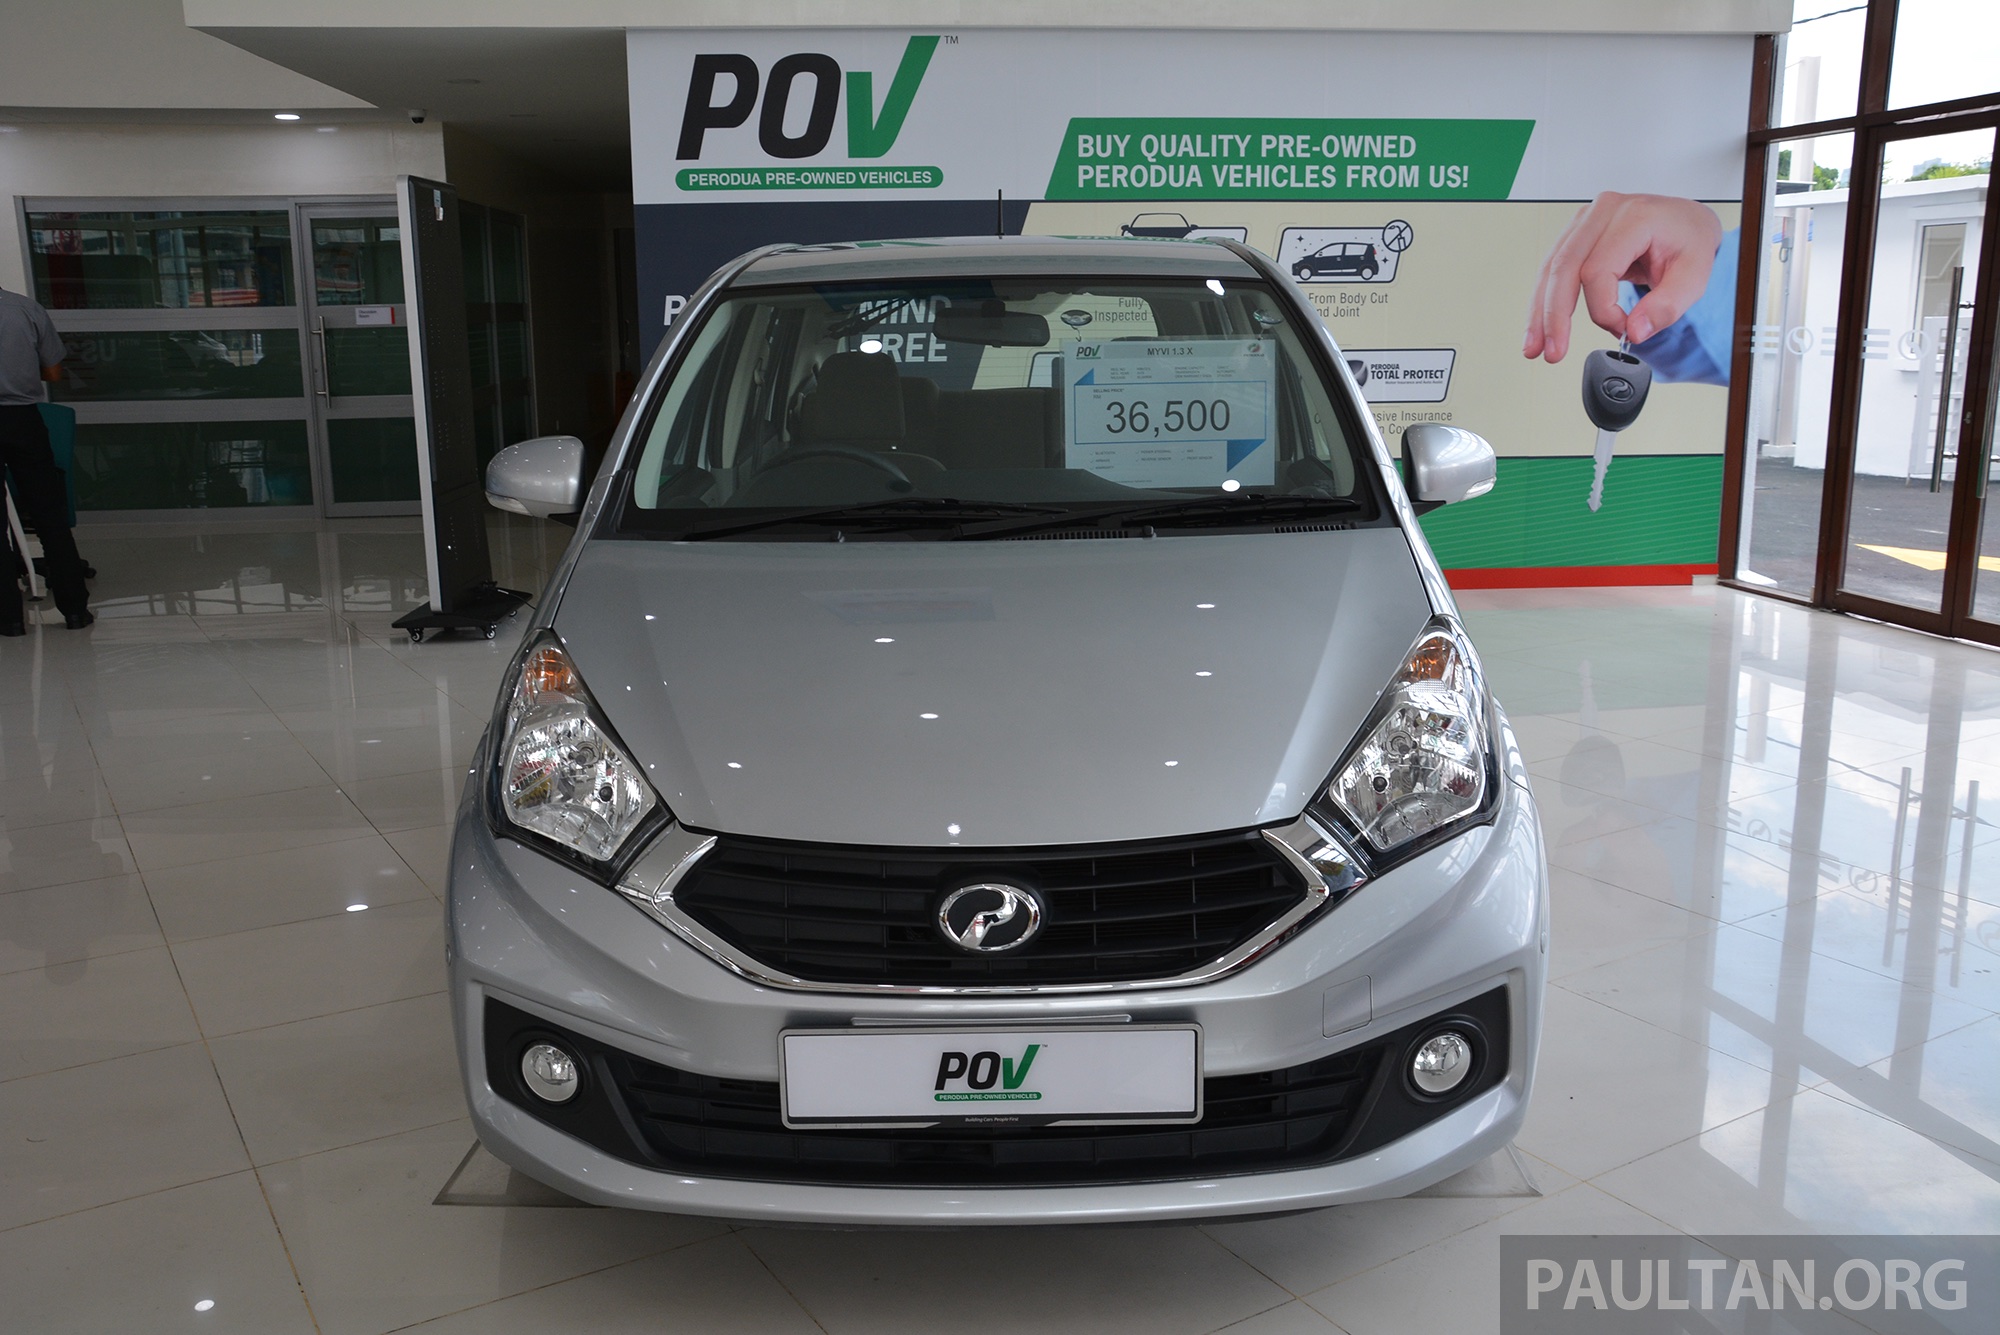 Perodua POV pre-owned vehicles retail business officially 